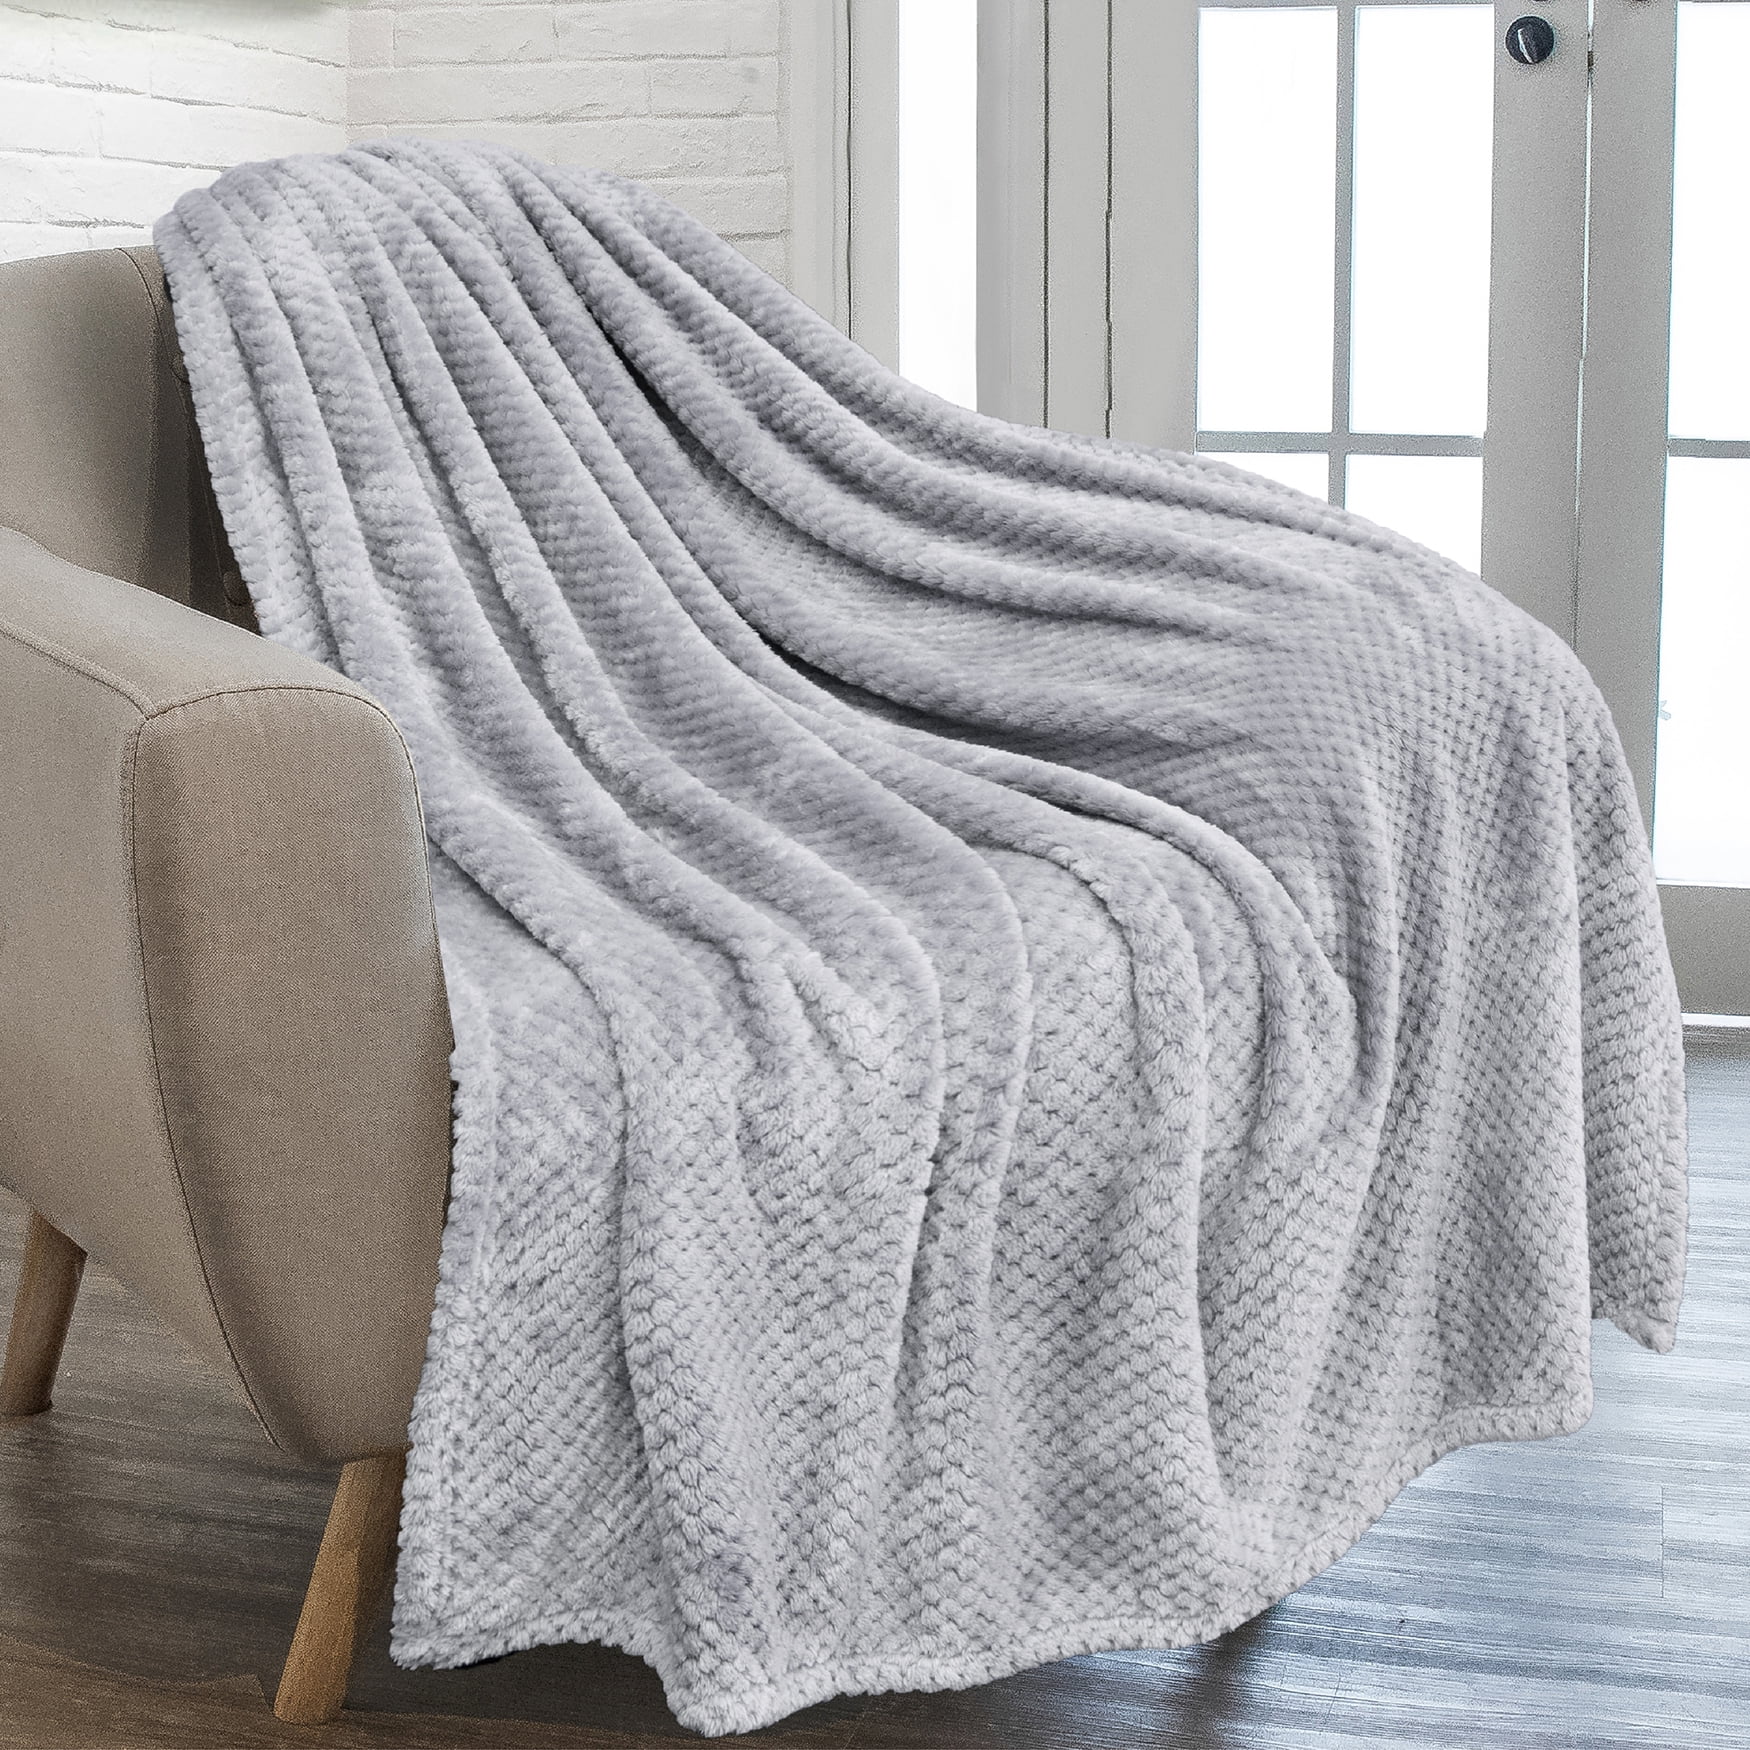 Bohemian Farmhouse Country Cottage Chic Barn Wood Ultra-Soft Micro Fleece Blanket Throw Blanket Fit Couch Bed Sofa All Season Light Weight Living Room 80x60 